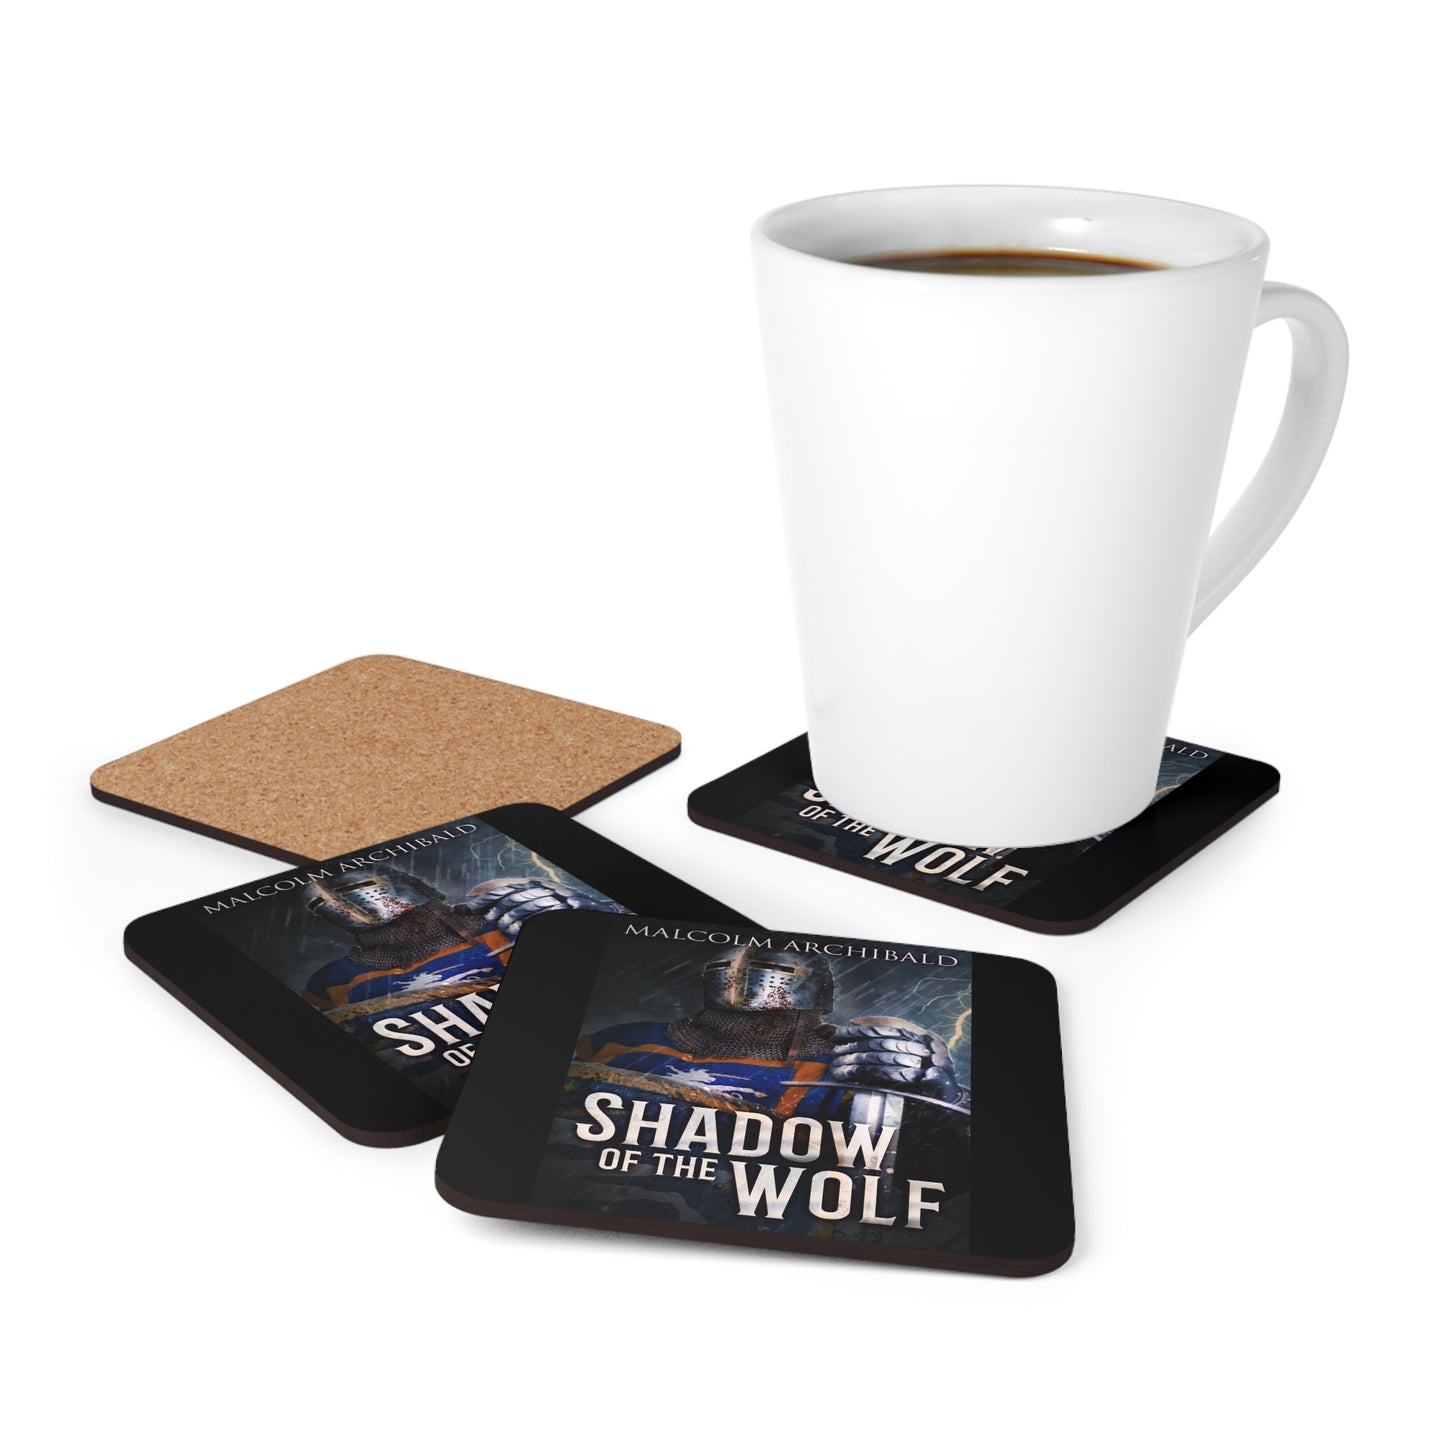 Shadow of the Wolf - Corkwood Coaster Set